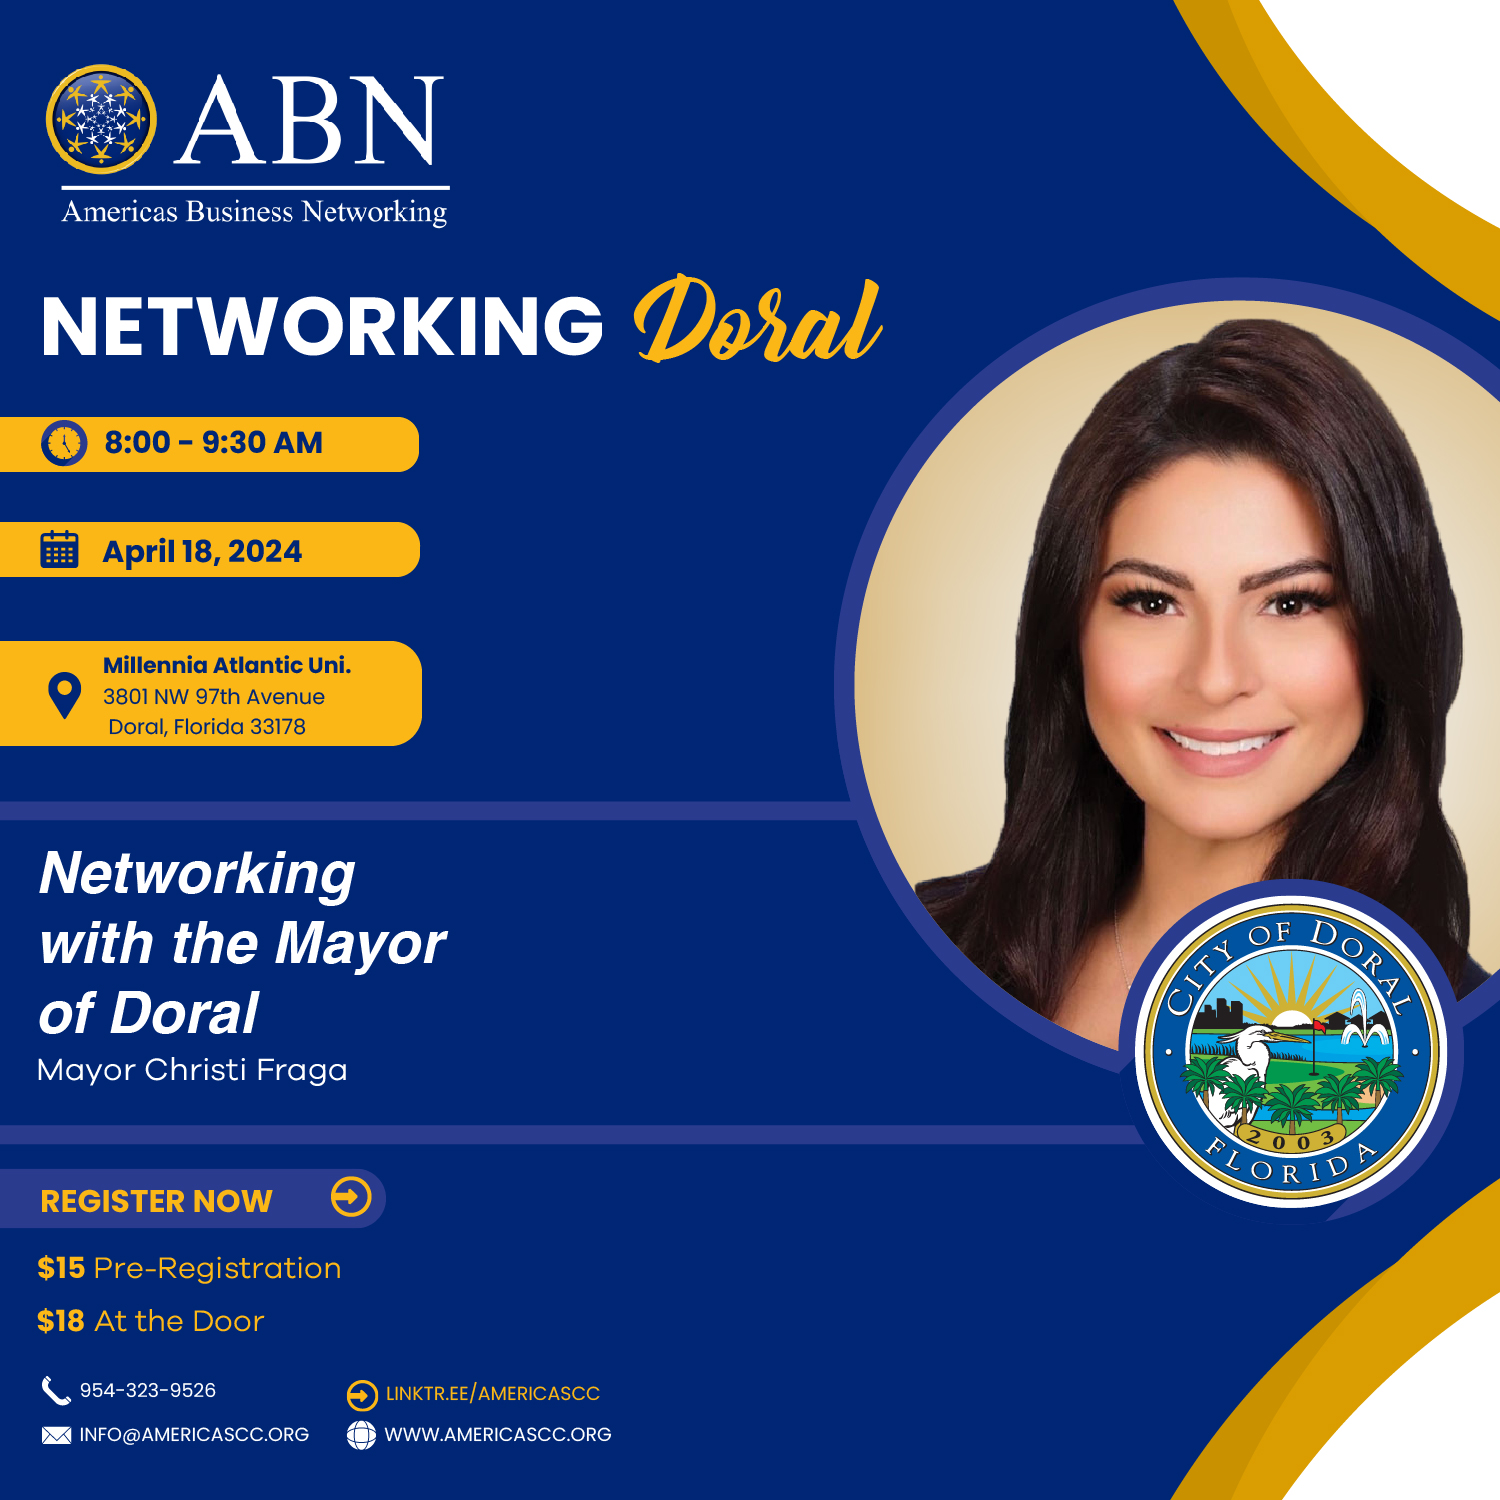 Millennia Atlantic University The ABN American Business Network Breakfast, a key gathering for networking and gaining insights is honored to welcome the Mayor of Doral City, Ms. Christi Fraga, as our distinguished guest speaker.